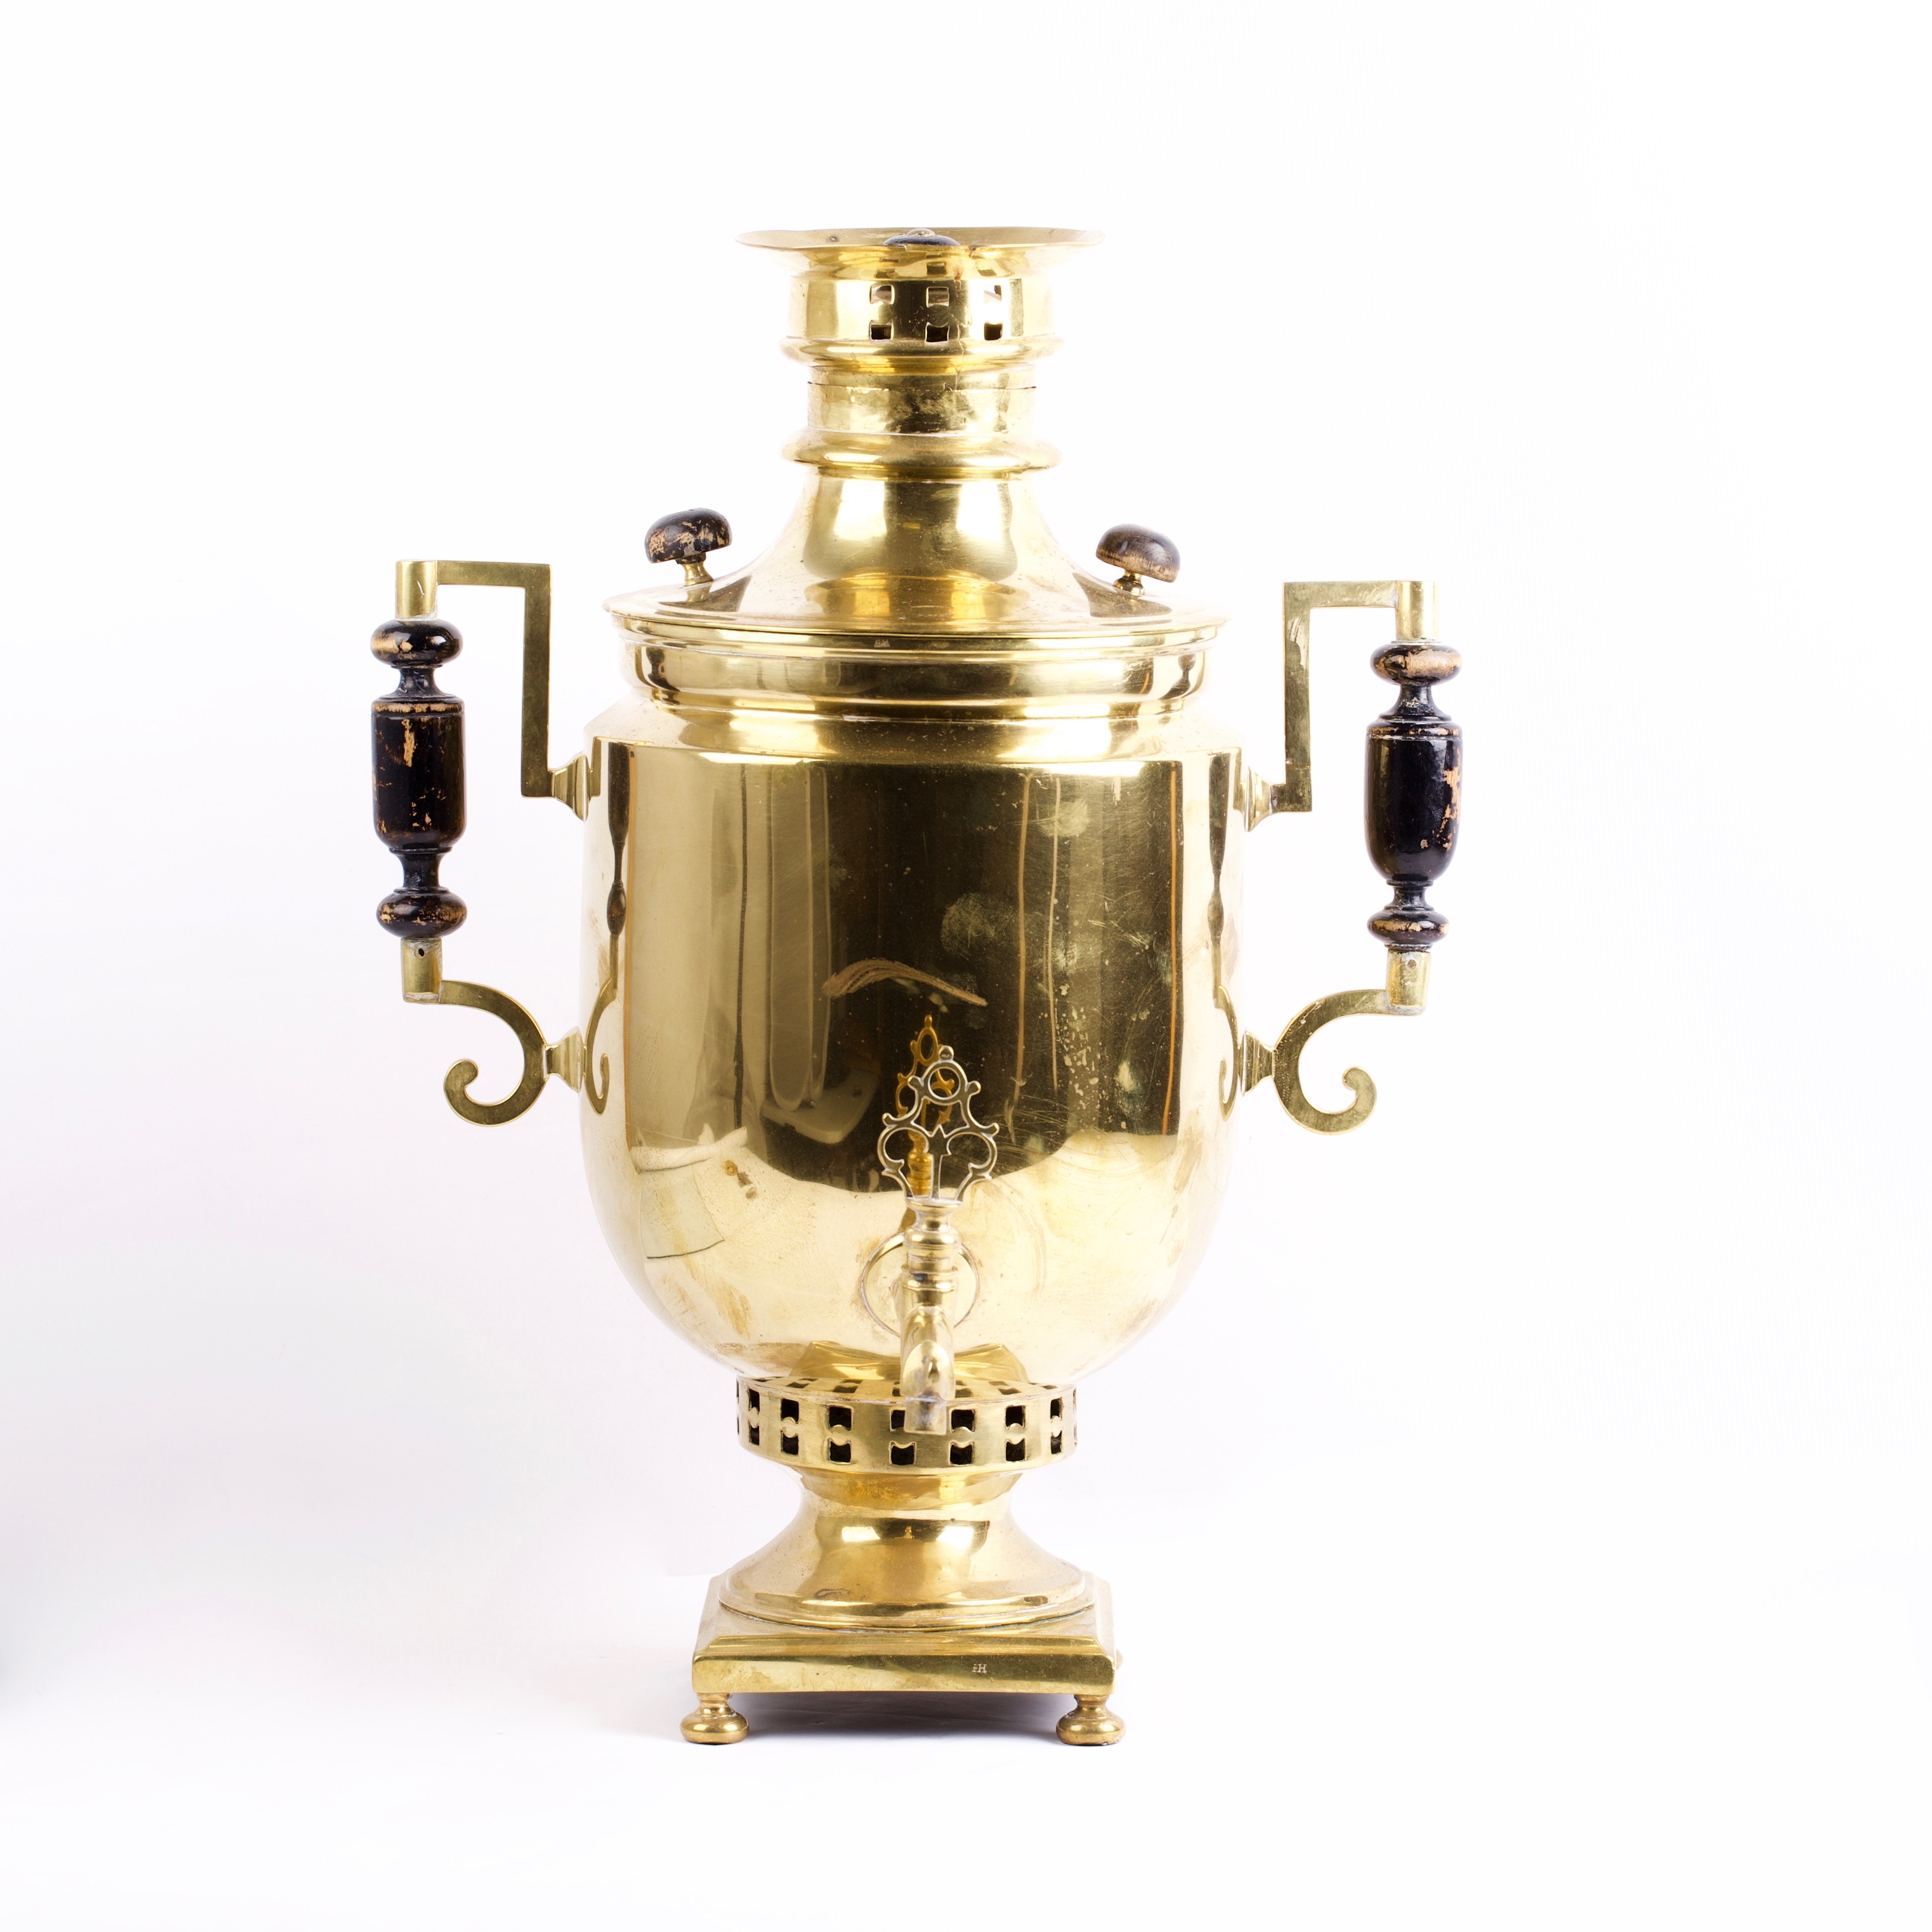 Russian brass samovar “Rudakov” - Antique weapons, collectibles, silver,  icons, bronze, swords, daggers..